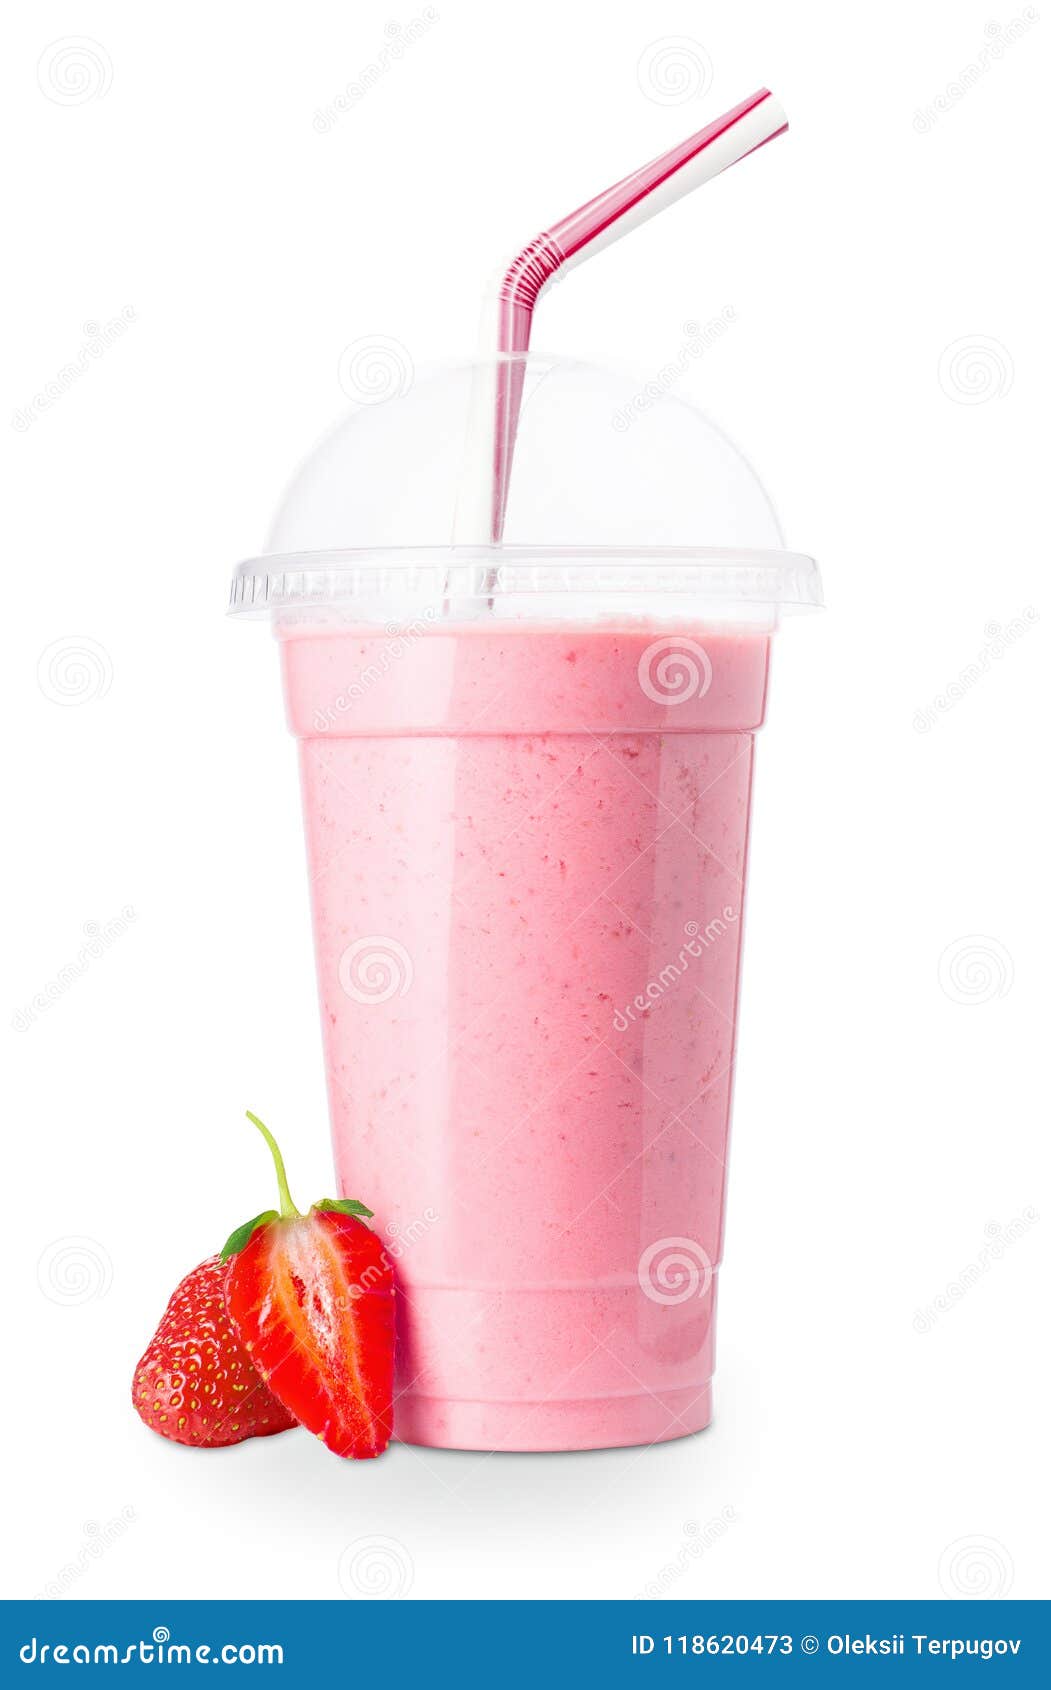 Strawberry Smoothie Cup with Straw - Free Download Images High Quality PNG,  JPG